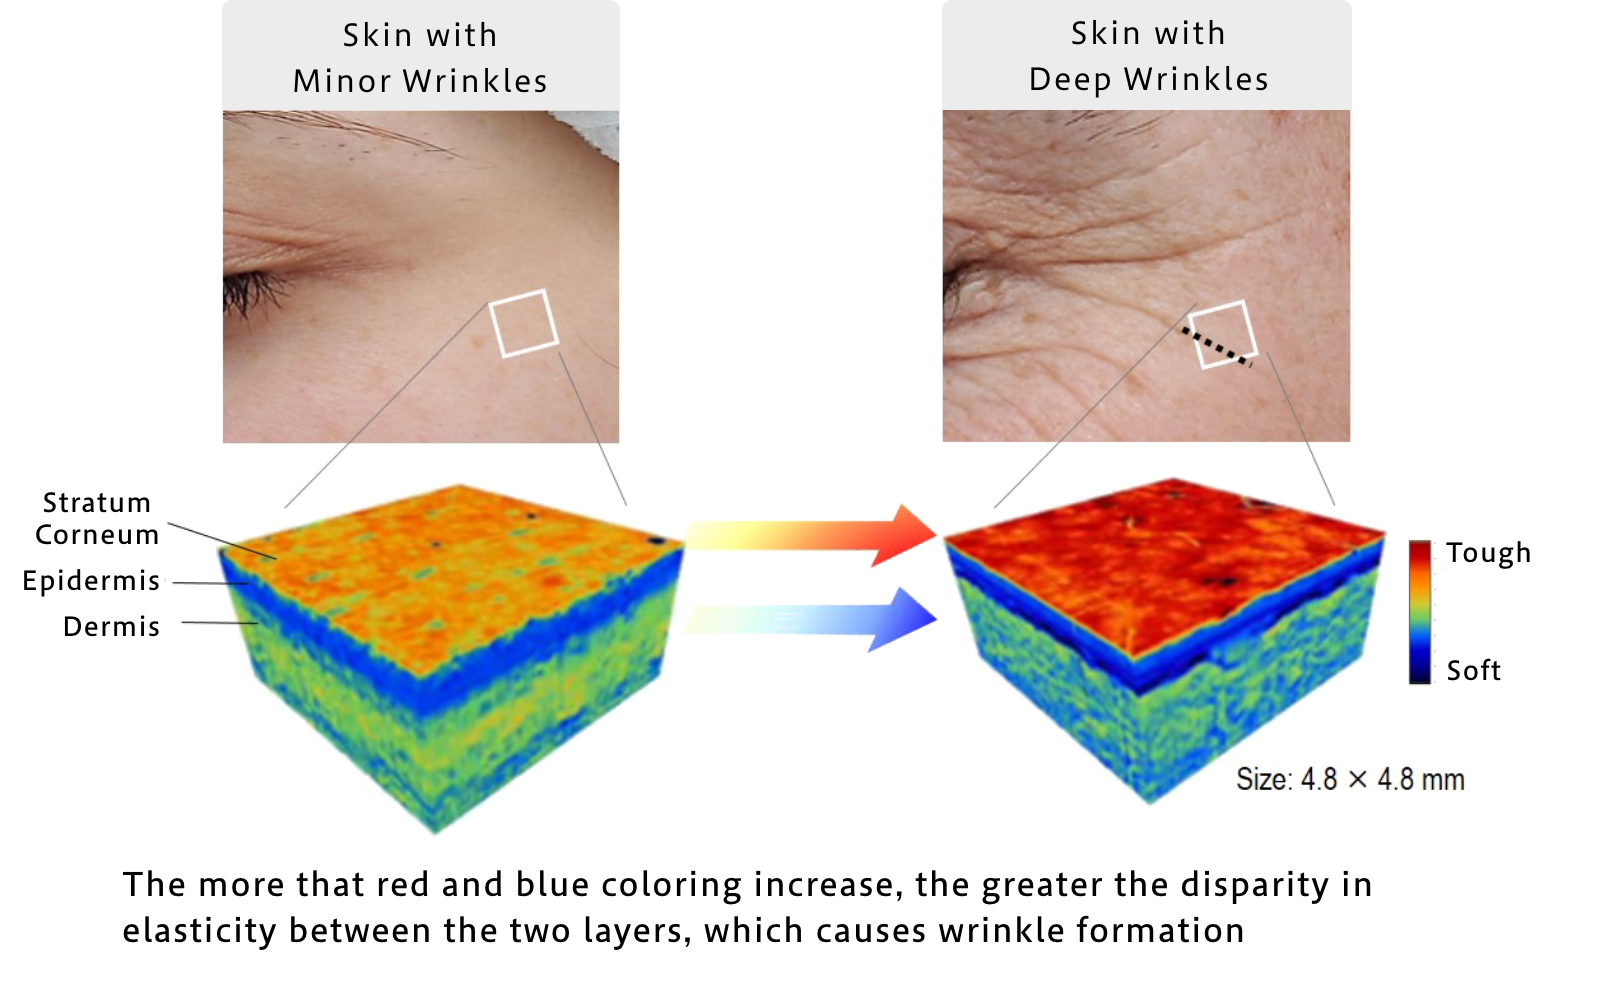 Shiseido’s world-first technology has enabled discovery of the “root causes behind wrinkles.” When the skin’s stratum corneum layer becomes too hard, it puts a burden on the dermal layer below, leading to wrinkle formation.